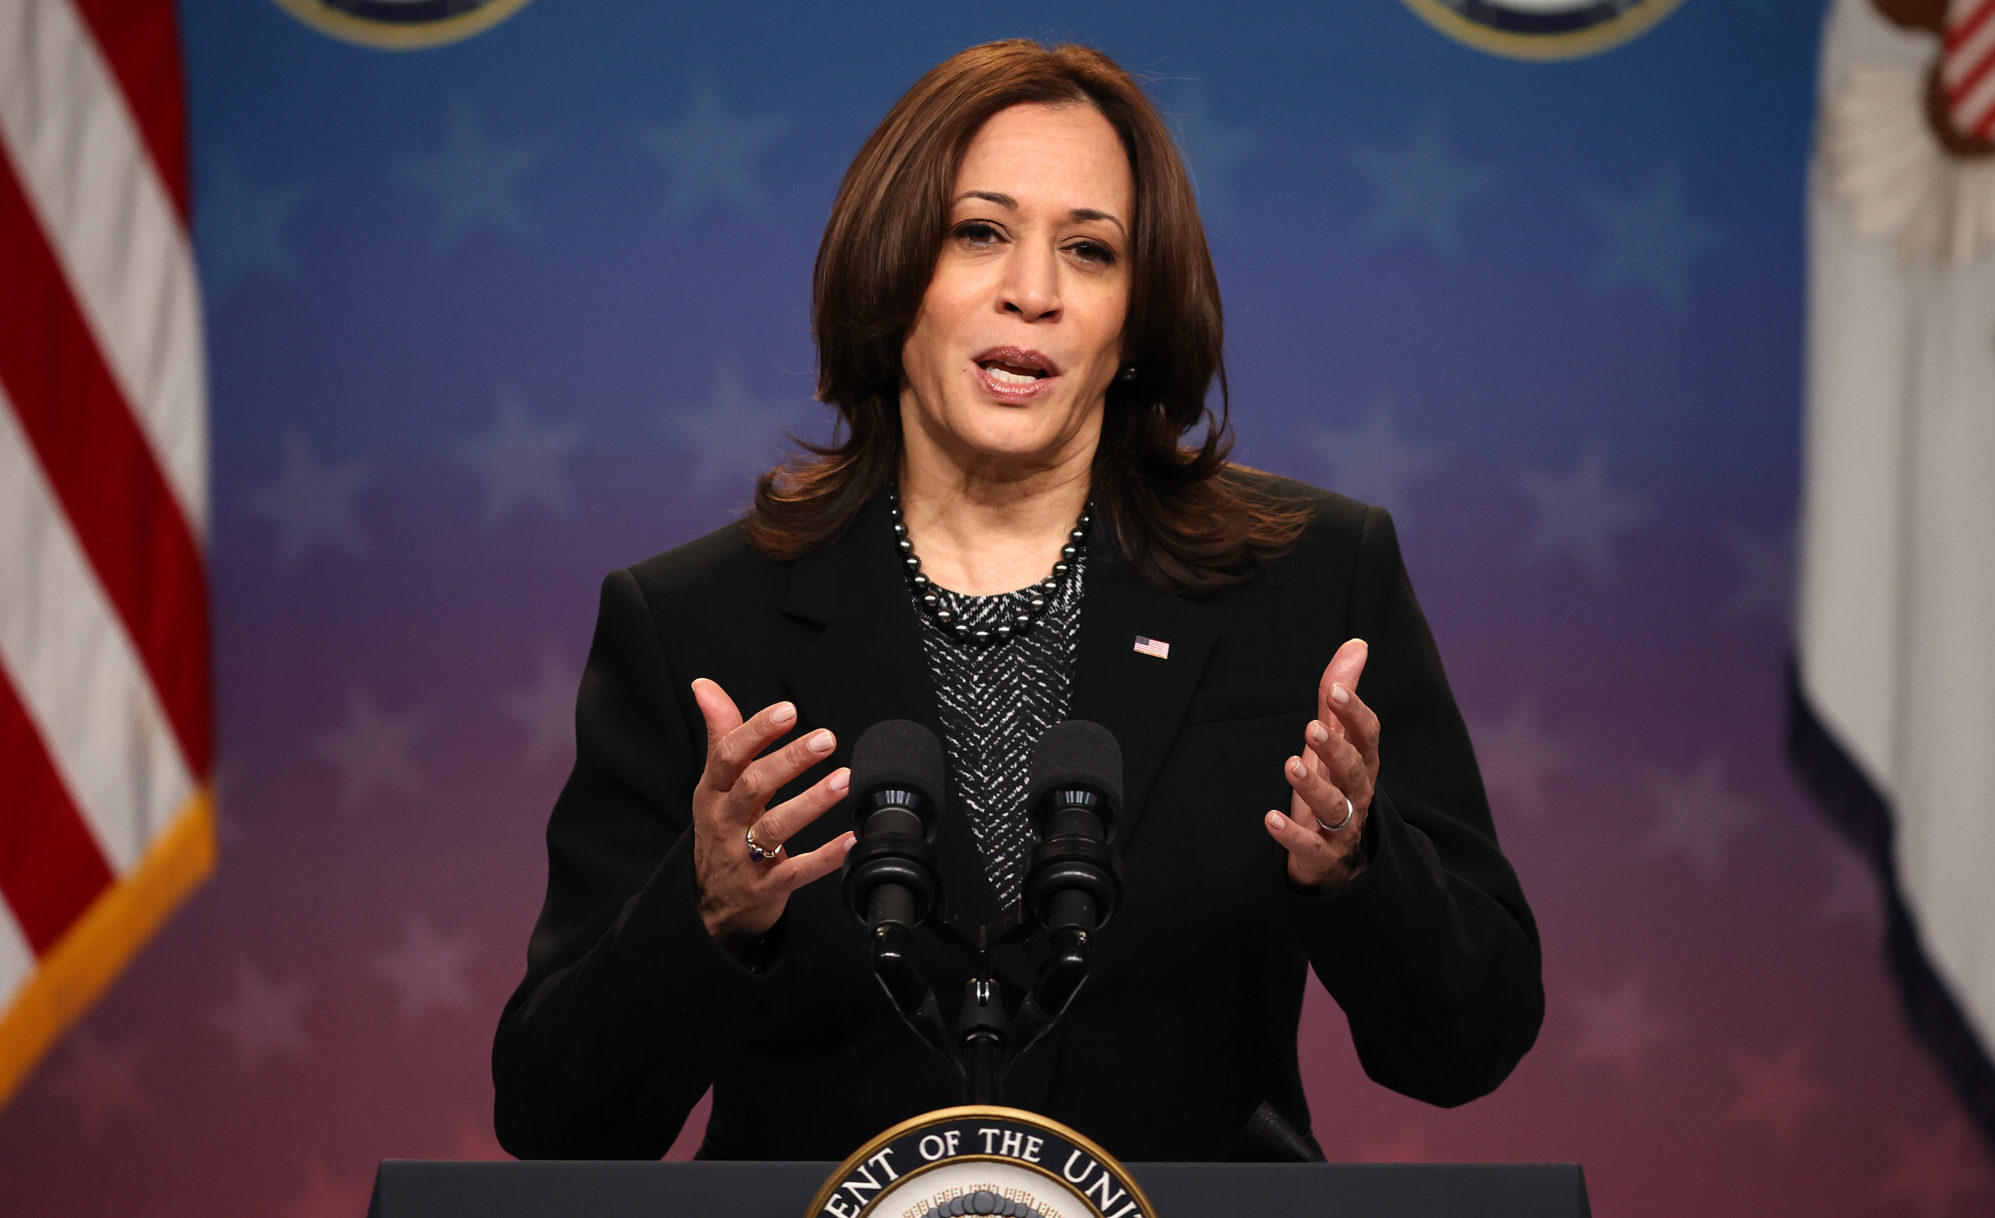 Vice President Harris Ducks Question on Child Immigrants: ‘I Haven’t Been Briefed’